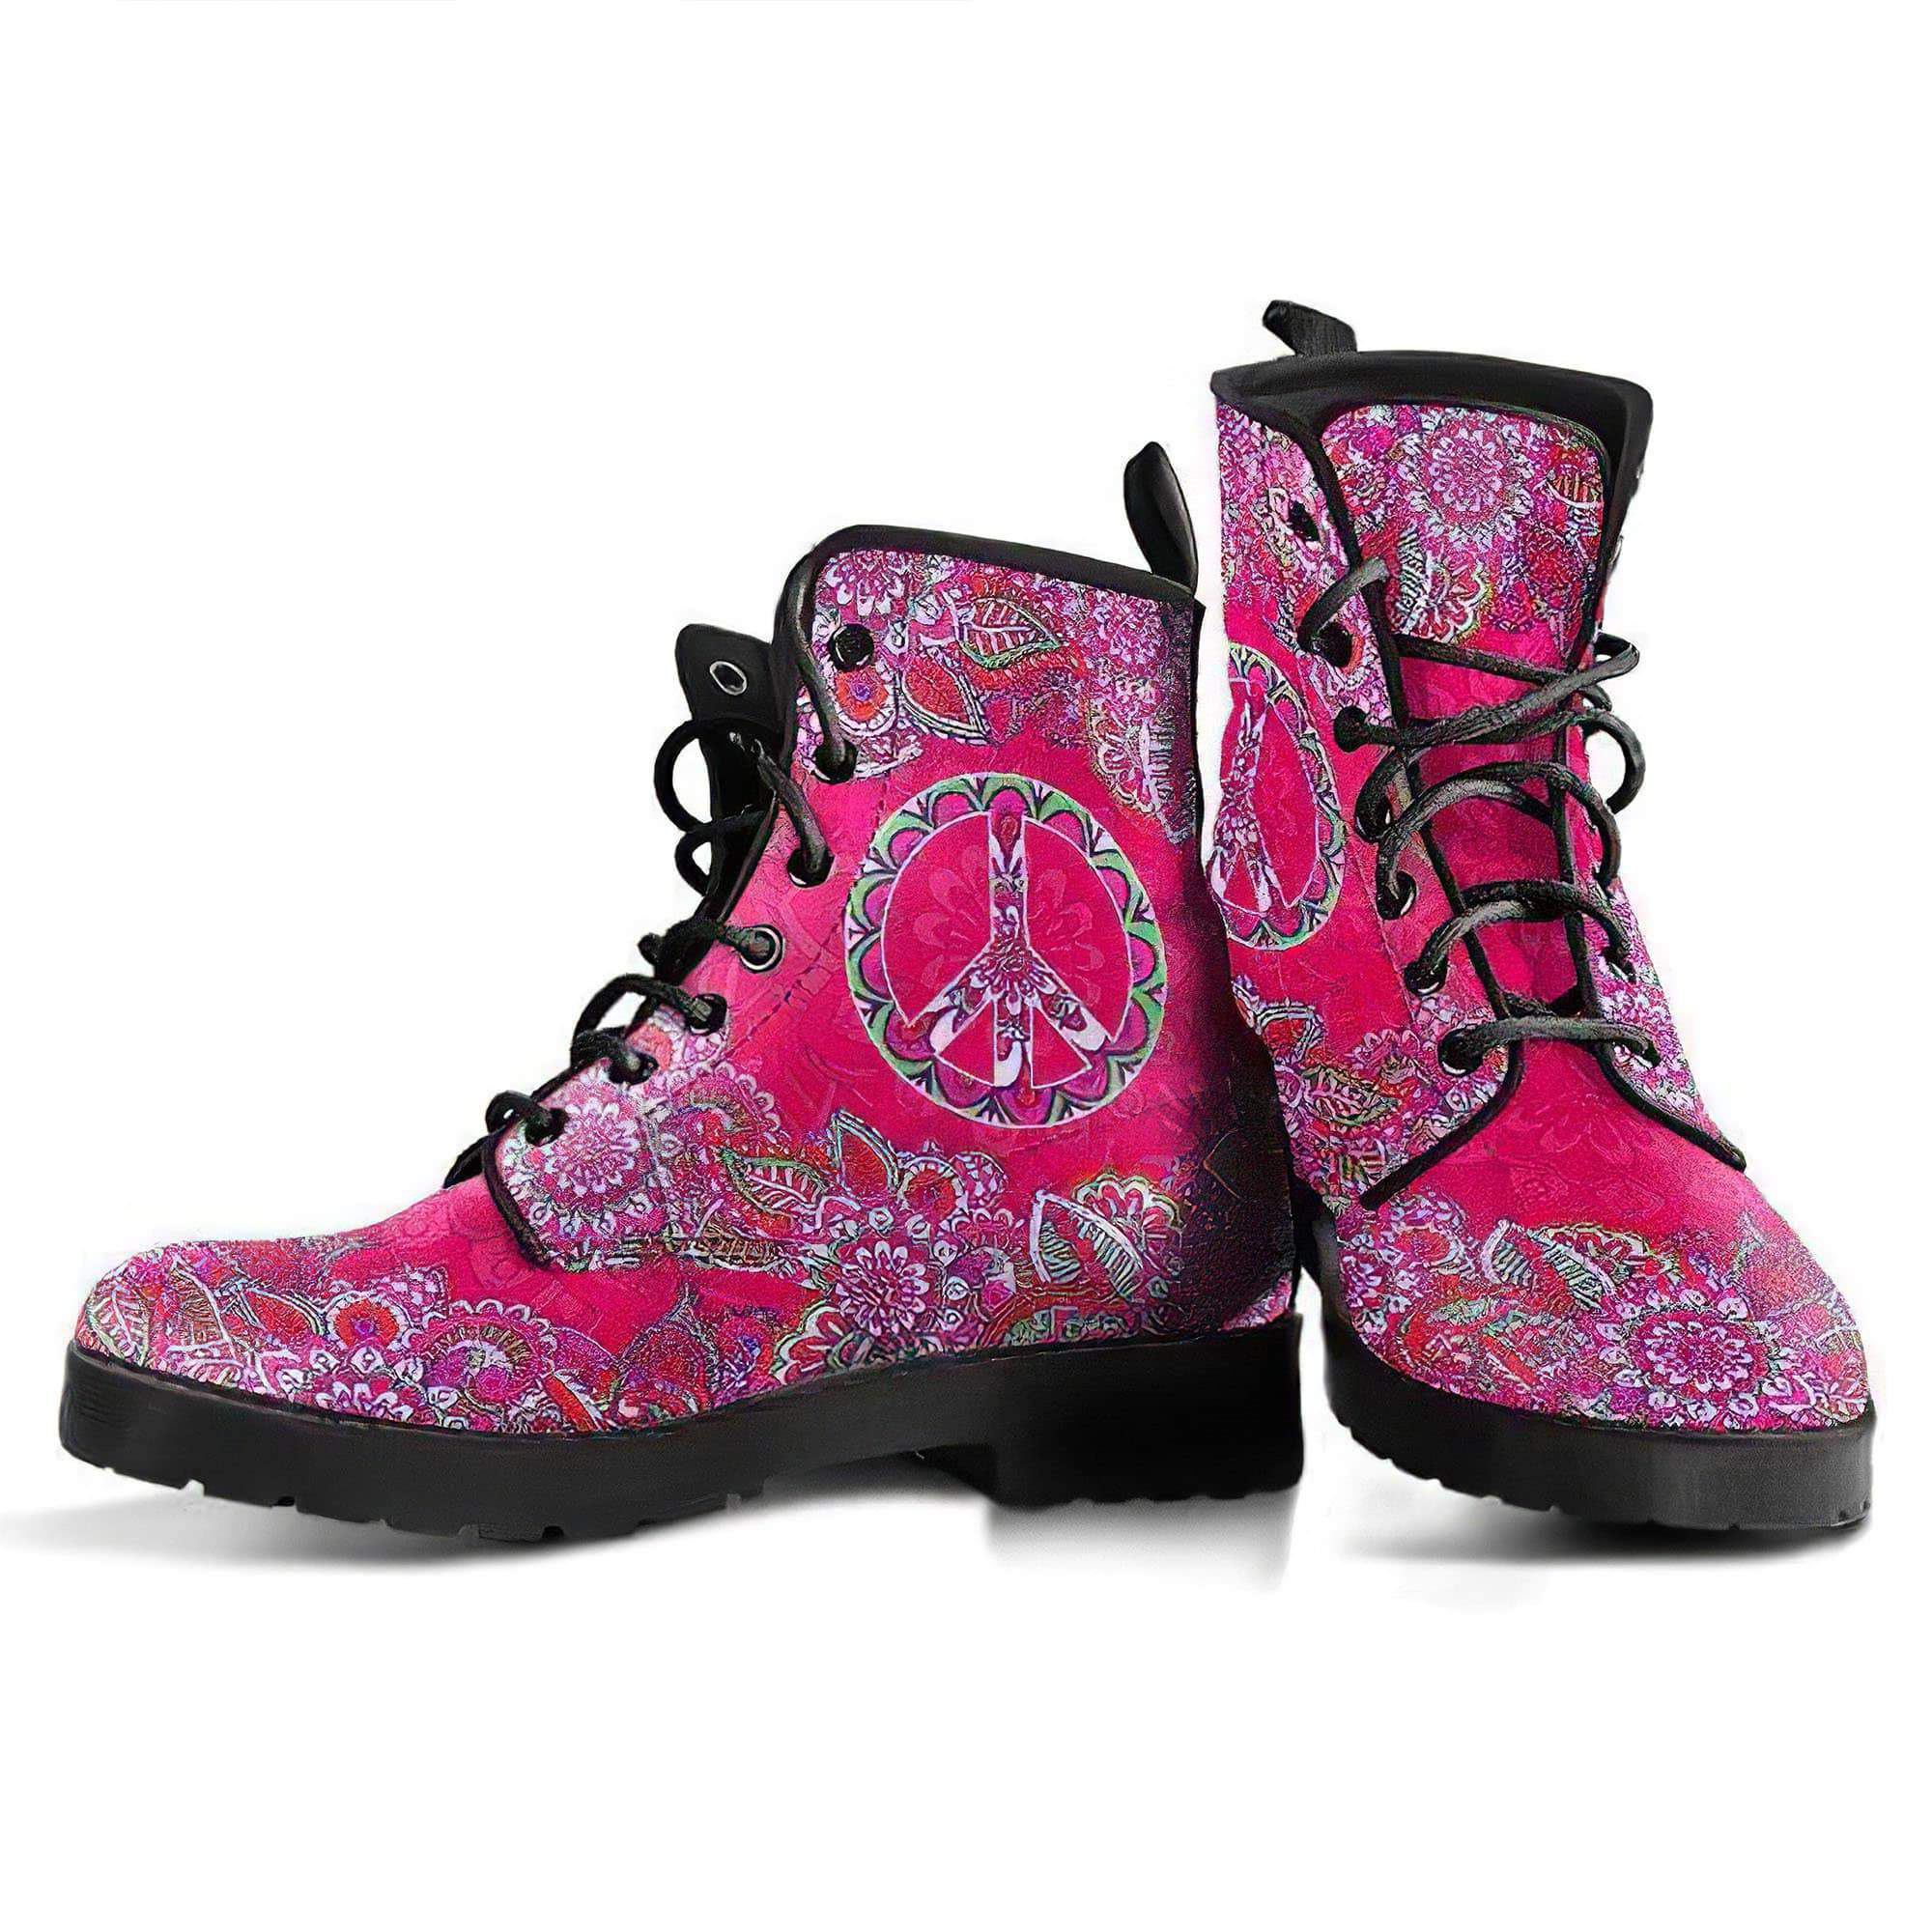 pink-peace-mandala-handcrafted-boots-women-s-leather-boots-12051931660349.jpg